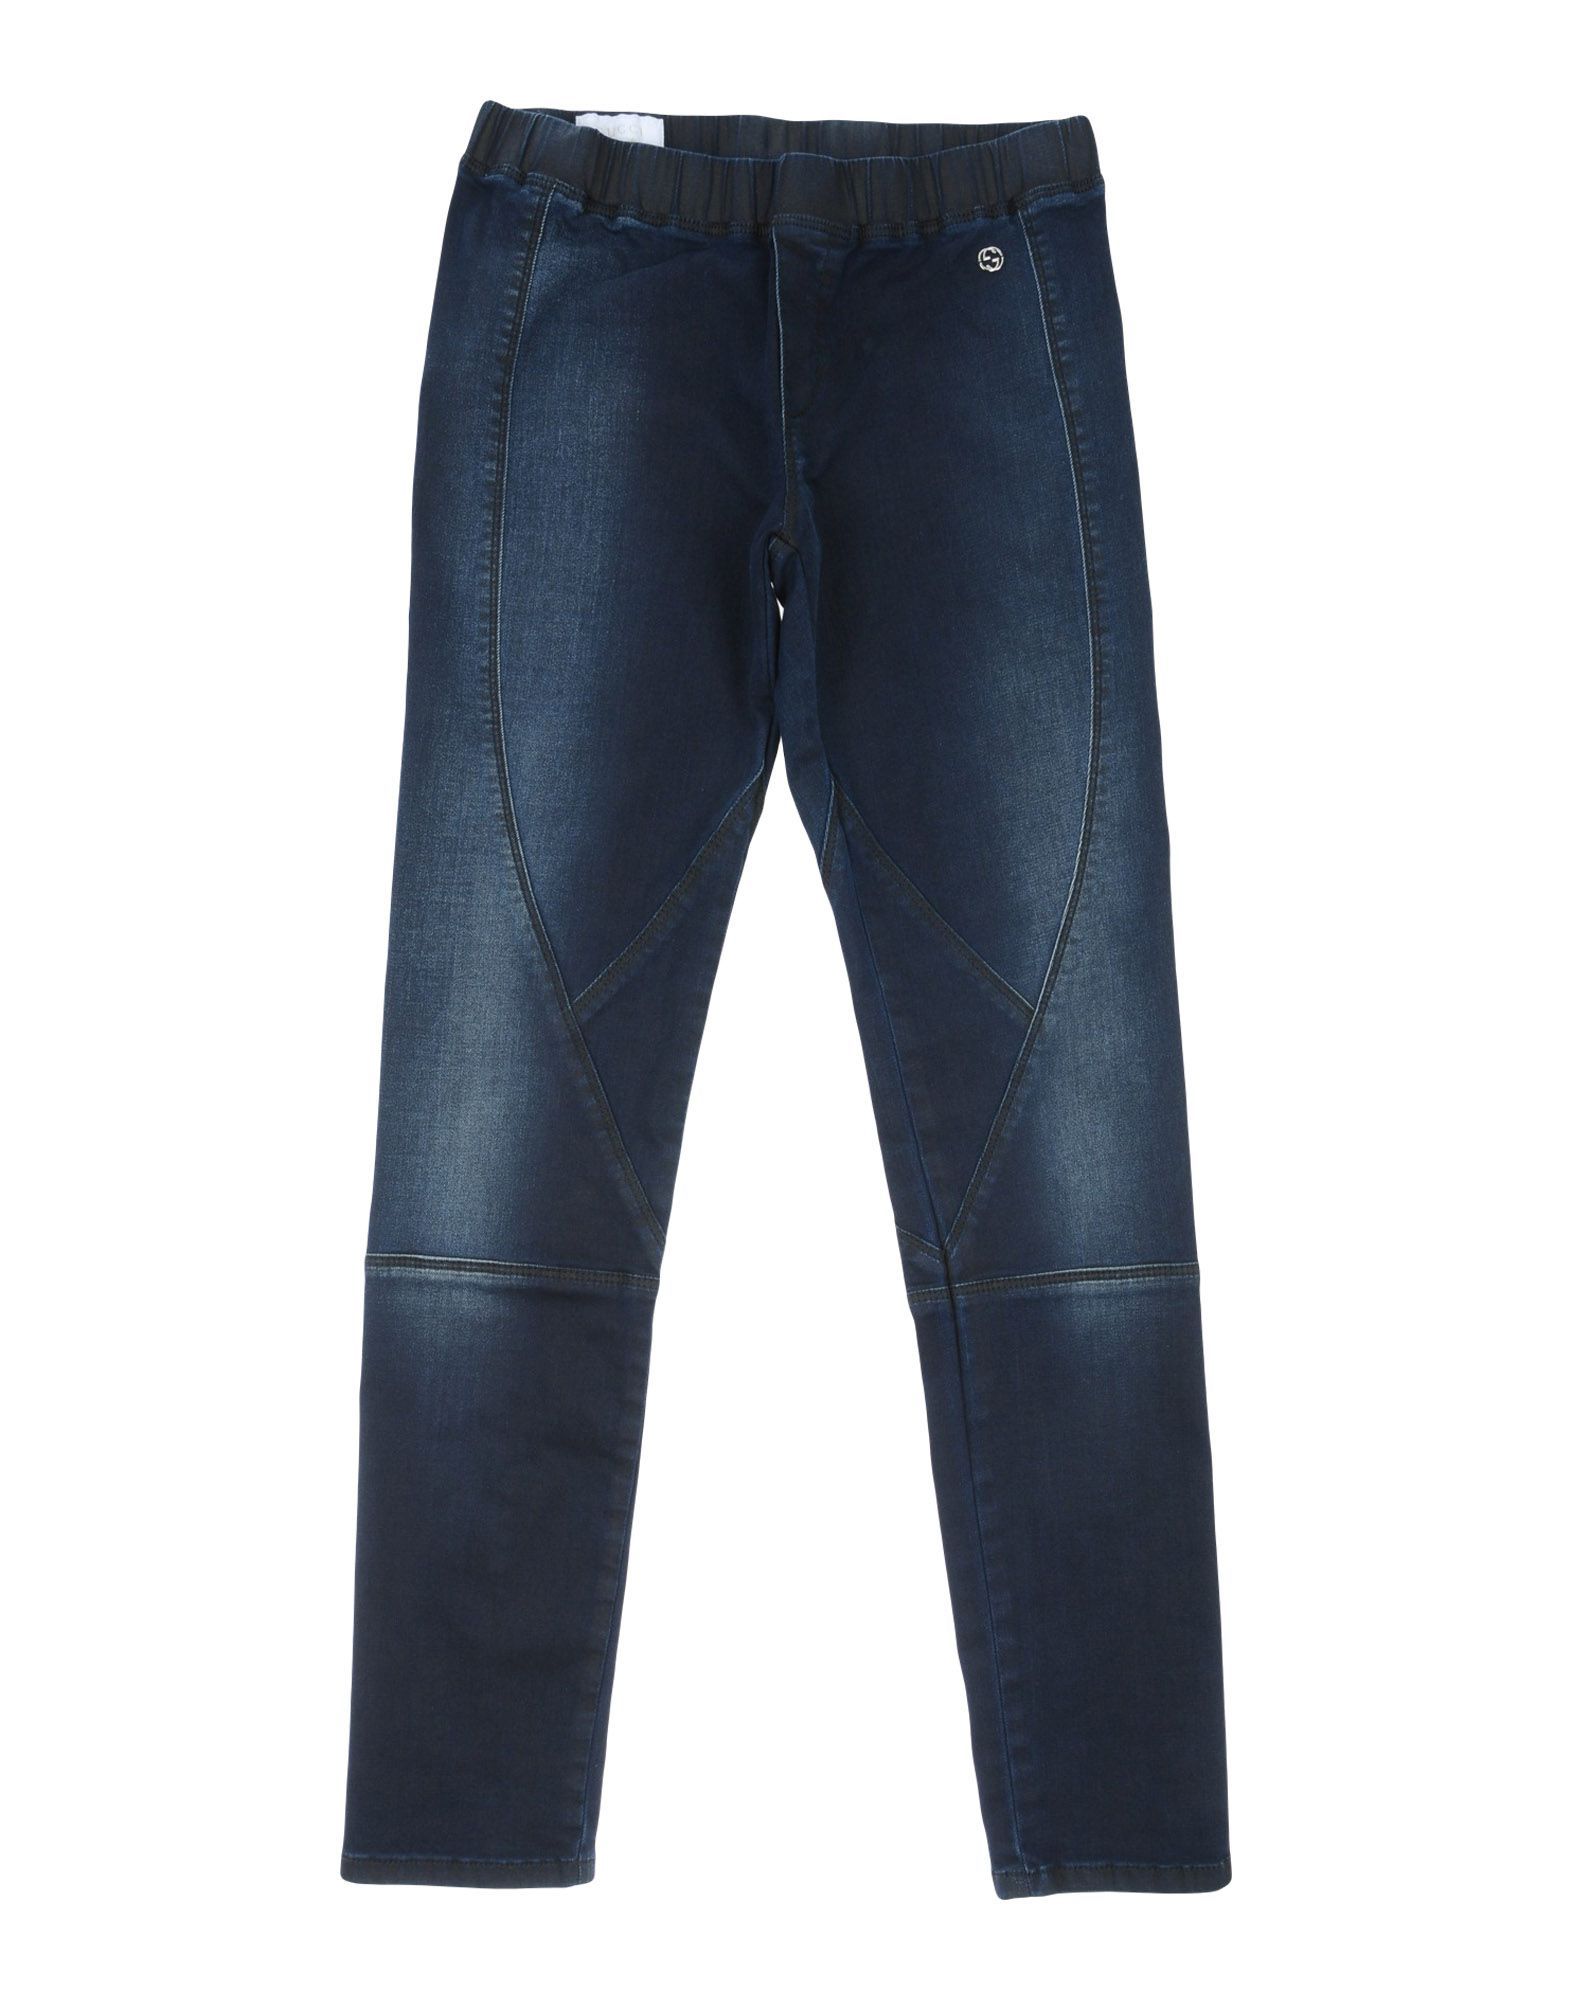 denim, coated effect, logo, faded, solid colour, dark wash, mid rise, elasticised waist, no pockets, wash at 30� c, do not dry clean, iron at 110� c max, do not bleach, do not tumble dry, straight-leg pants